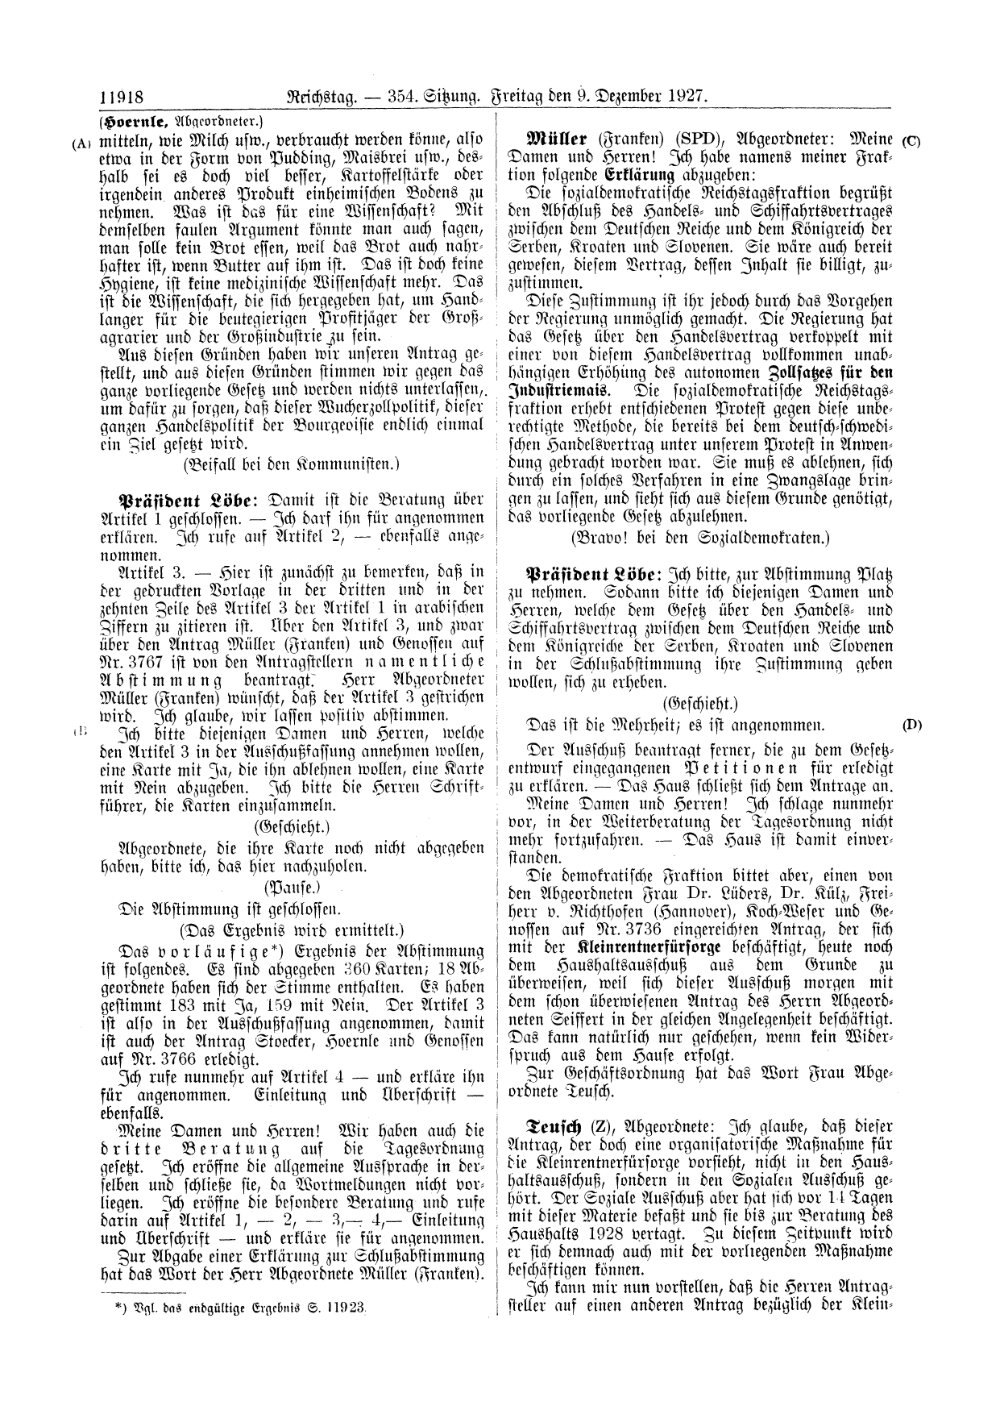 Scan of page 11918